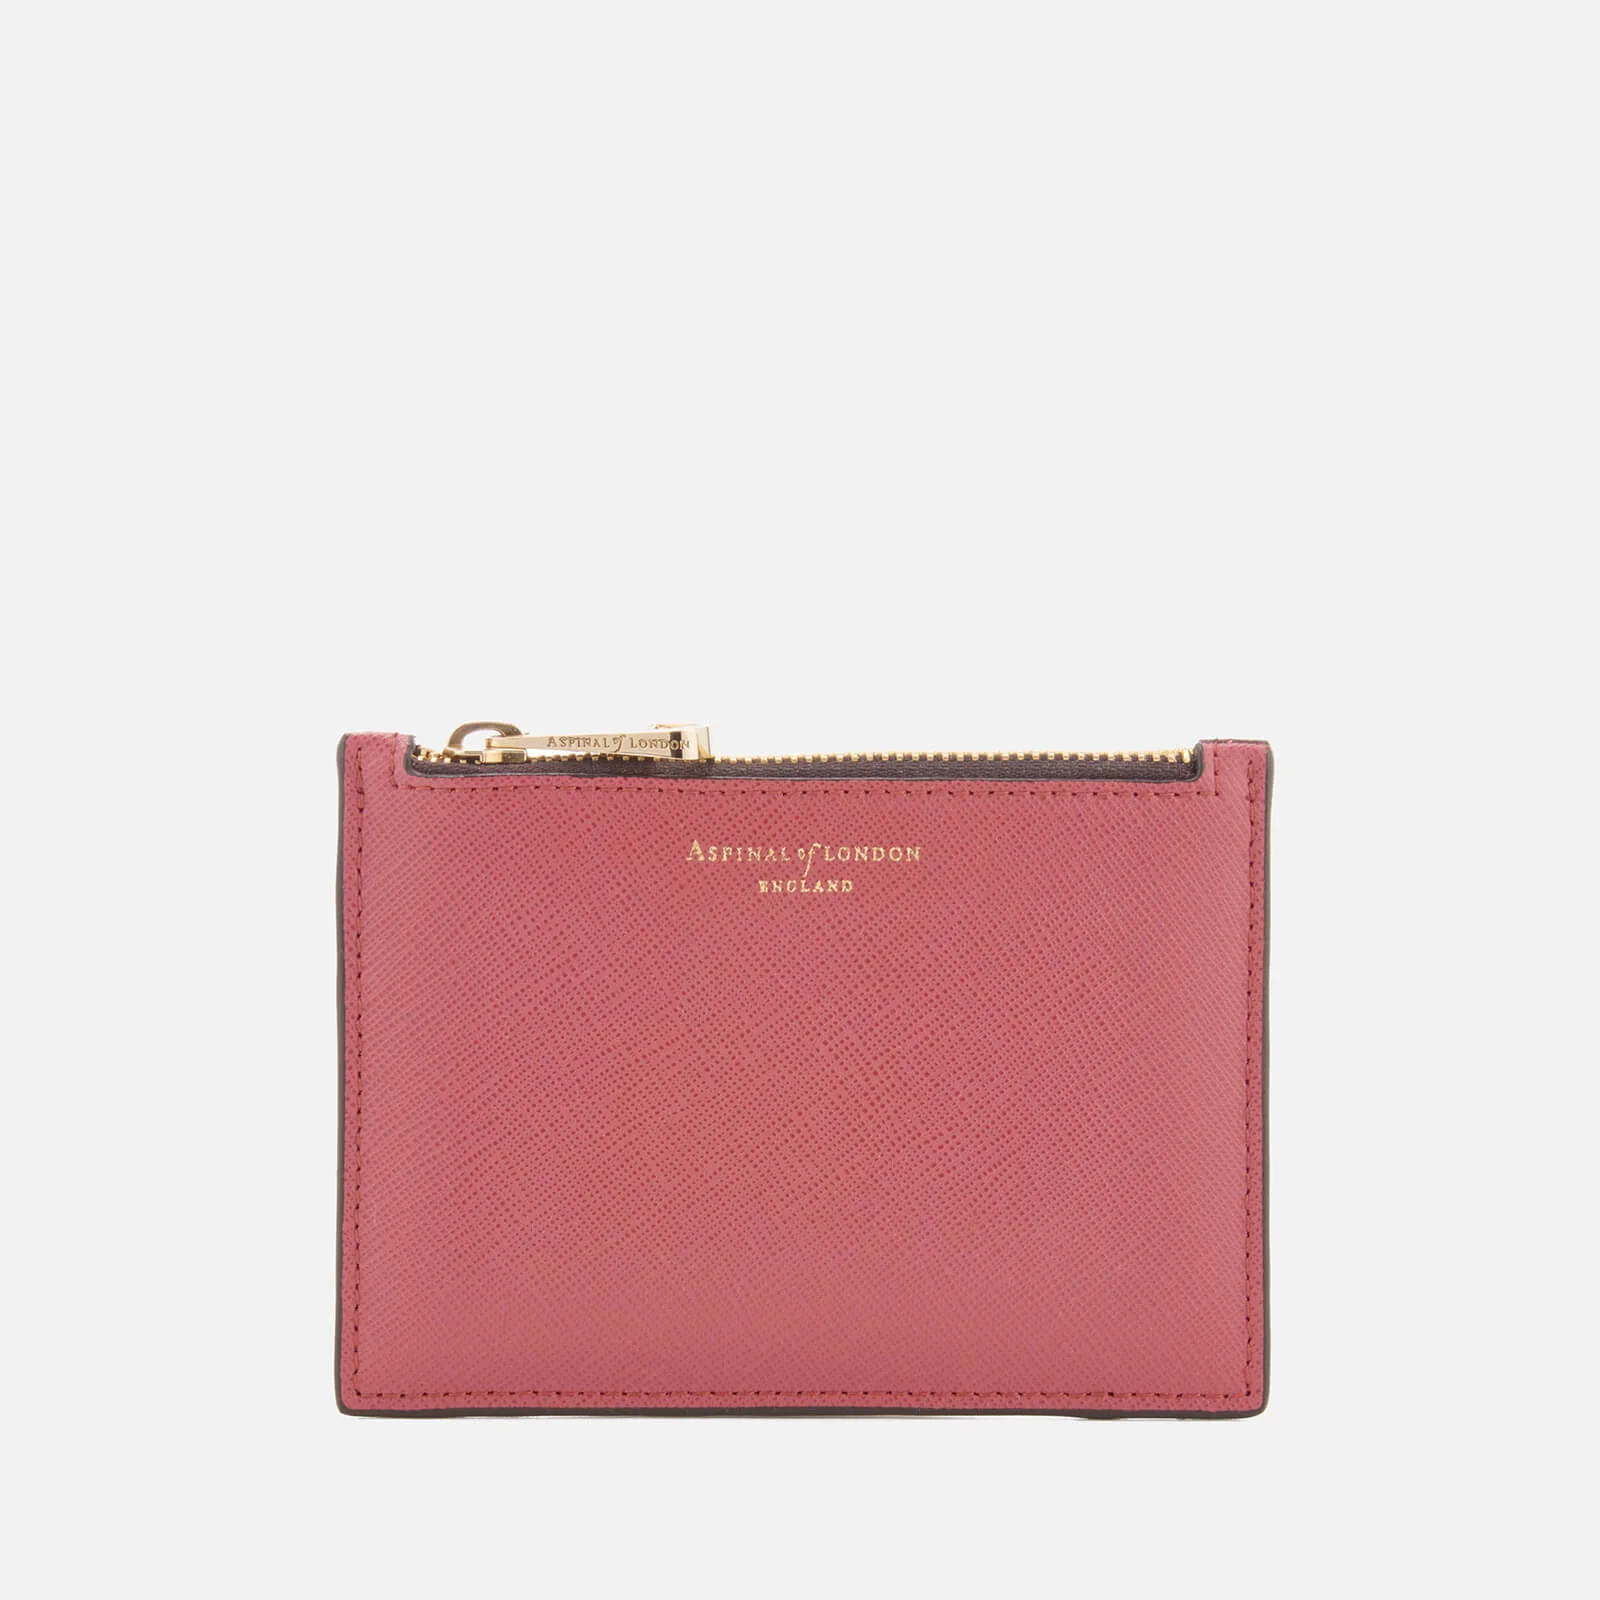 Aspinal of London Women's Essential Small Pouch Bag - Blusher/Grape Image 1